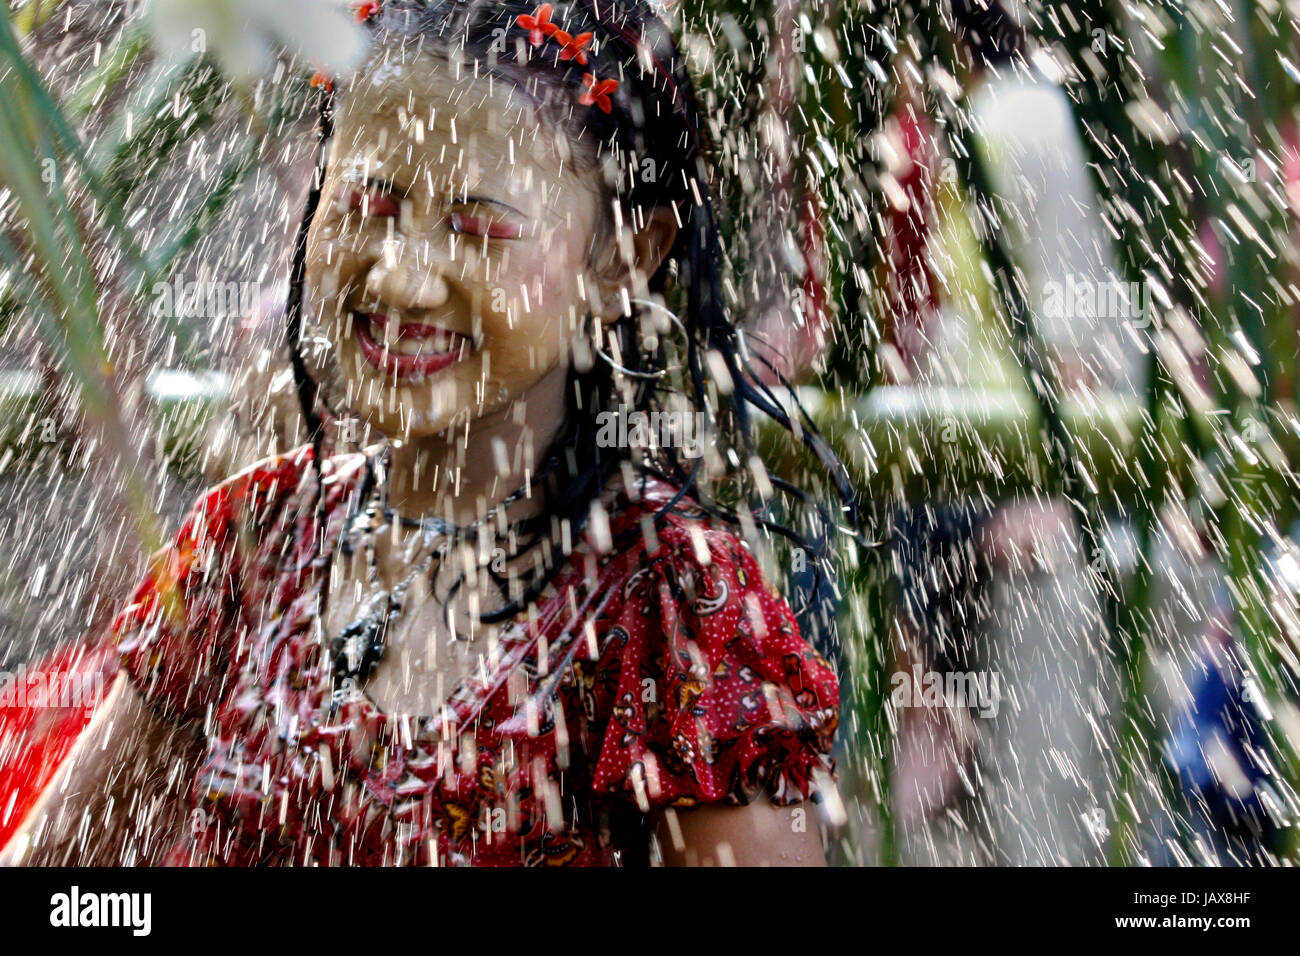 The Water Festival of the ethnic Rakhain community is a part of their New Year celebration. Young boys and girls throw water at each other during this Stock Photo